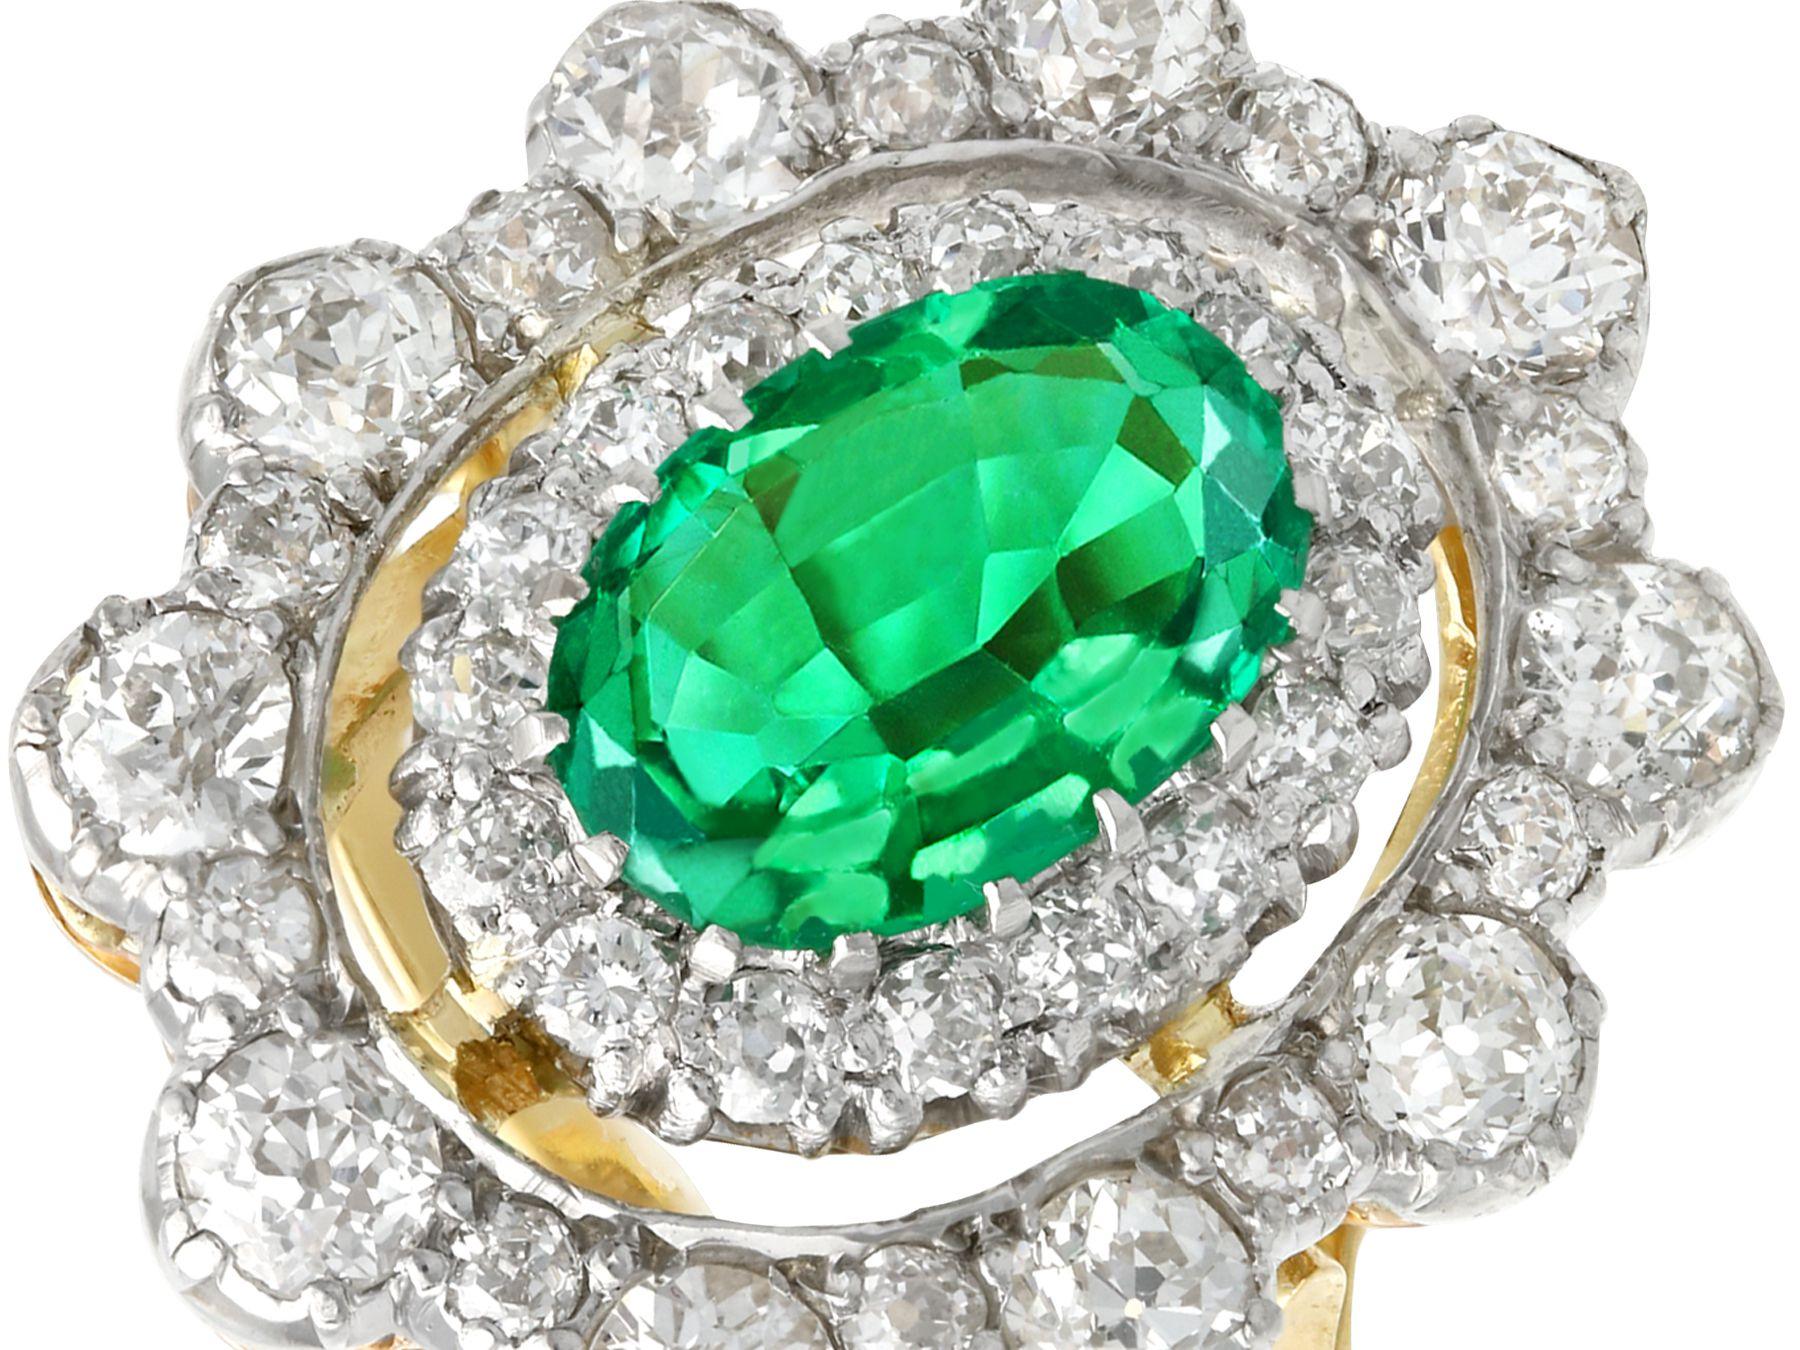 3.12 Carat Colombian Emerald and 3.15 Carat Diamond Yellow Gold Cocktail Ring In Excellent Condition For Sale In Jesmond, Newcastle Upon Tyne